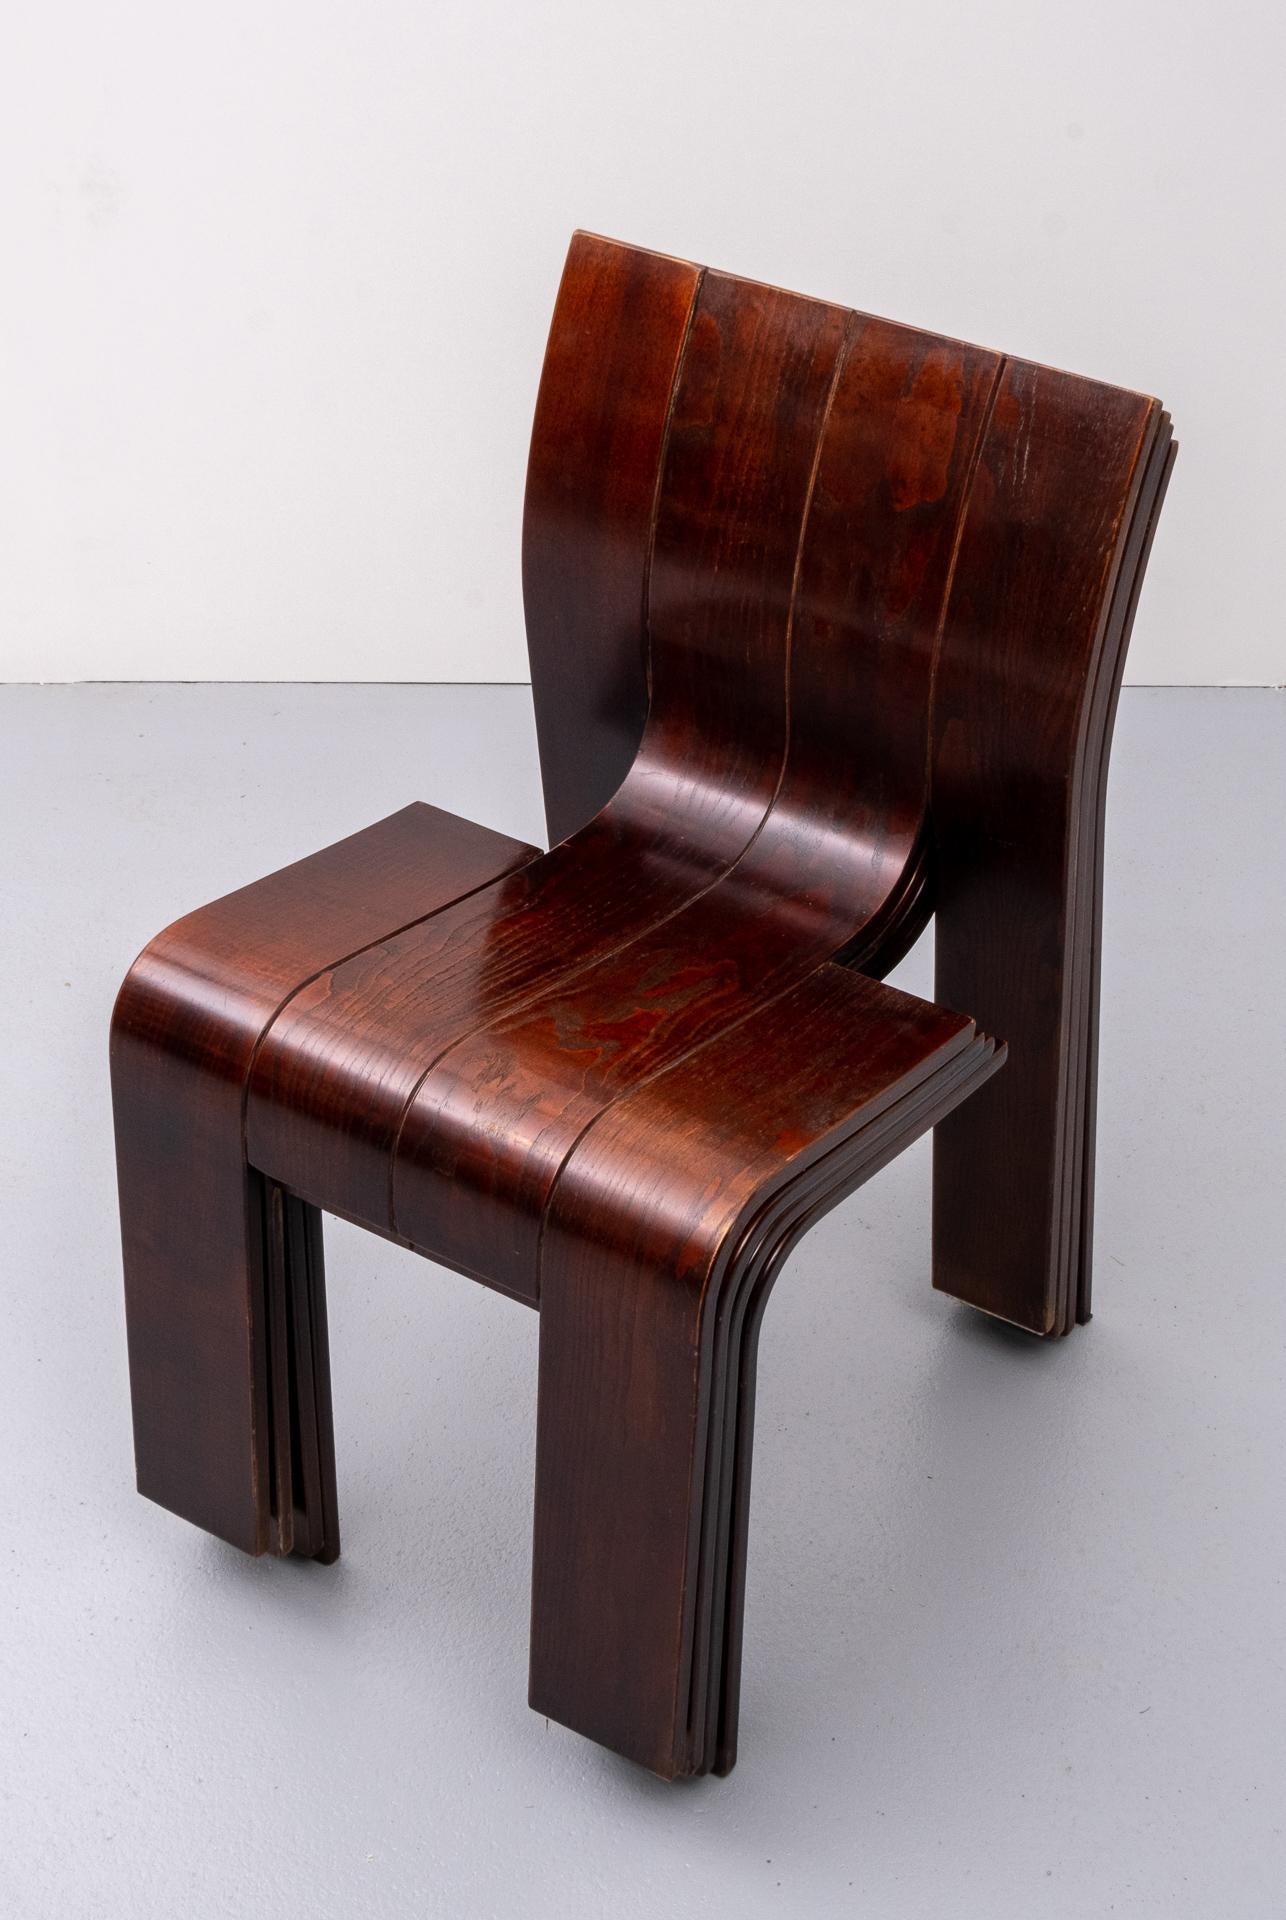 Gijs Bakker stripchairs for Castelijn 1974 beautiful brown red color
The underlying idea was to reduce the complexity of the chair's form until a powerful image remained. The chair is made of 6 strips of laminated beechwood 11 cm wide, linked by